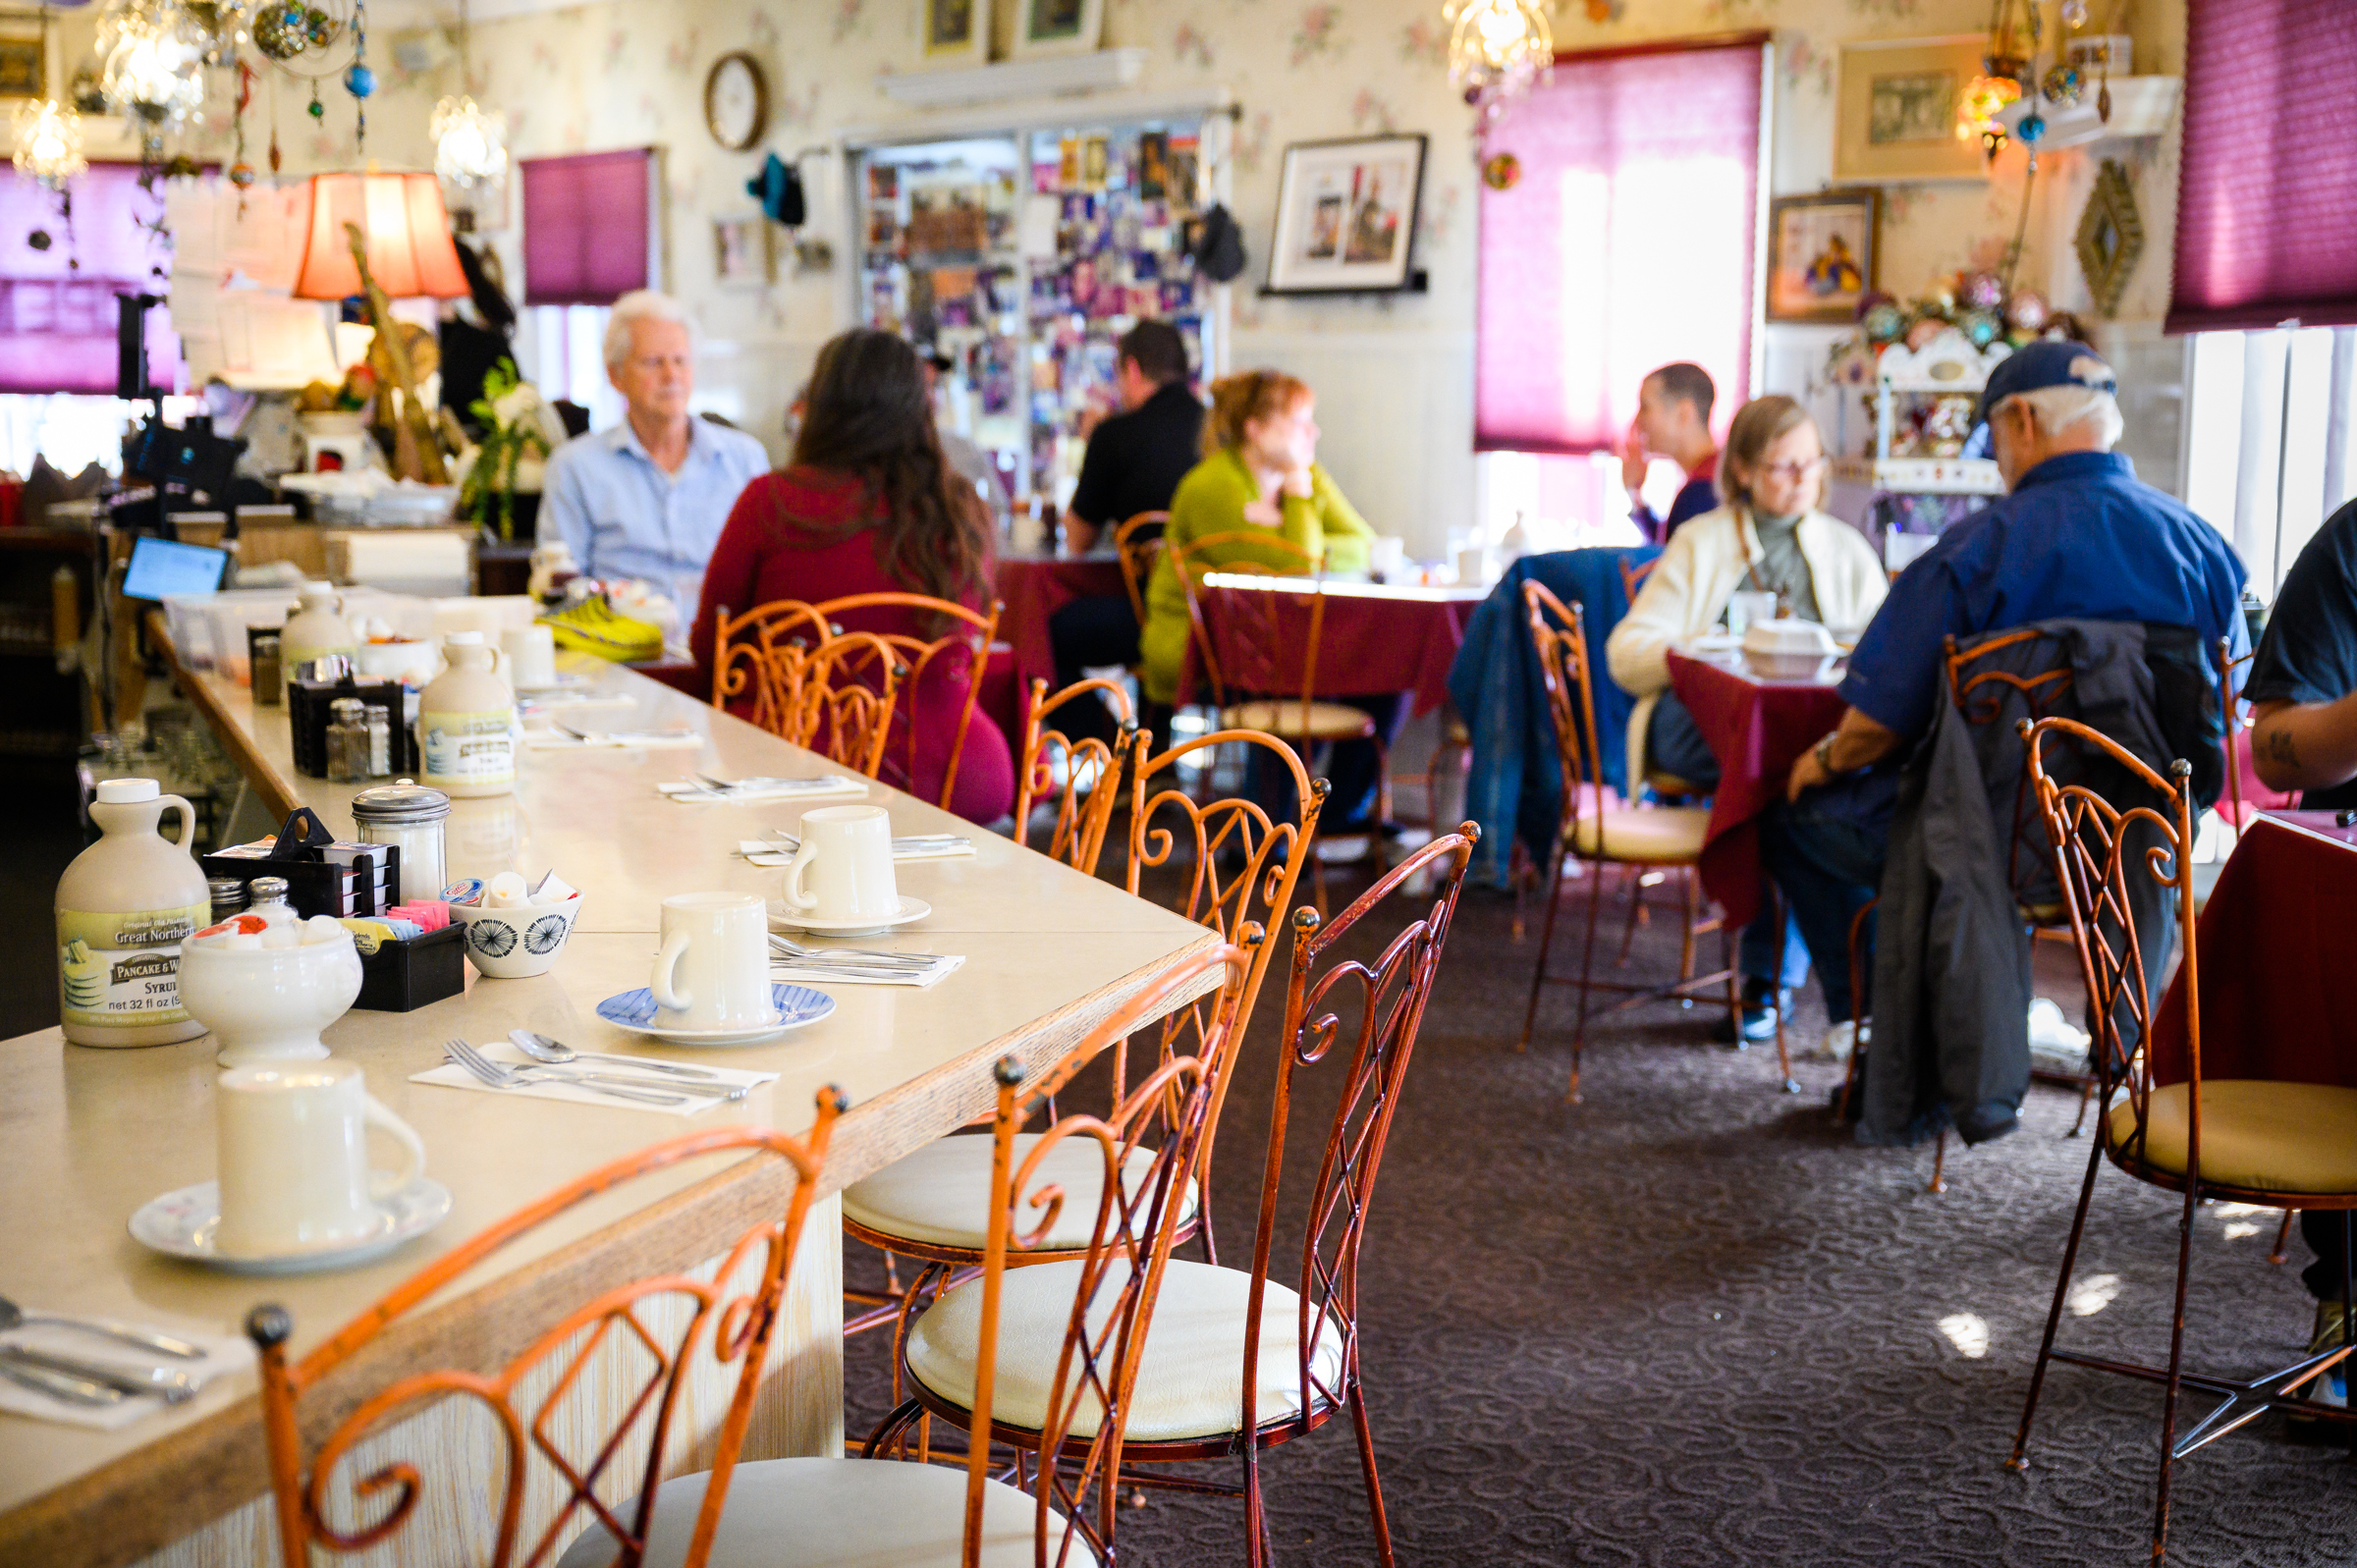 Customers sit and eat within the dining room at Cameo Cafe in Portland, Oregon.